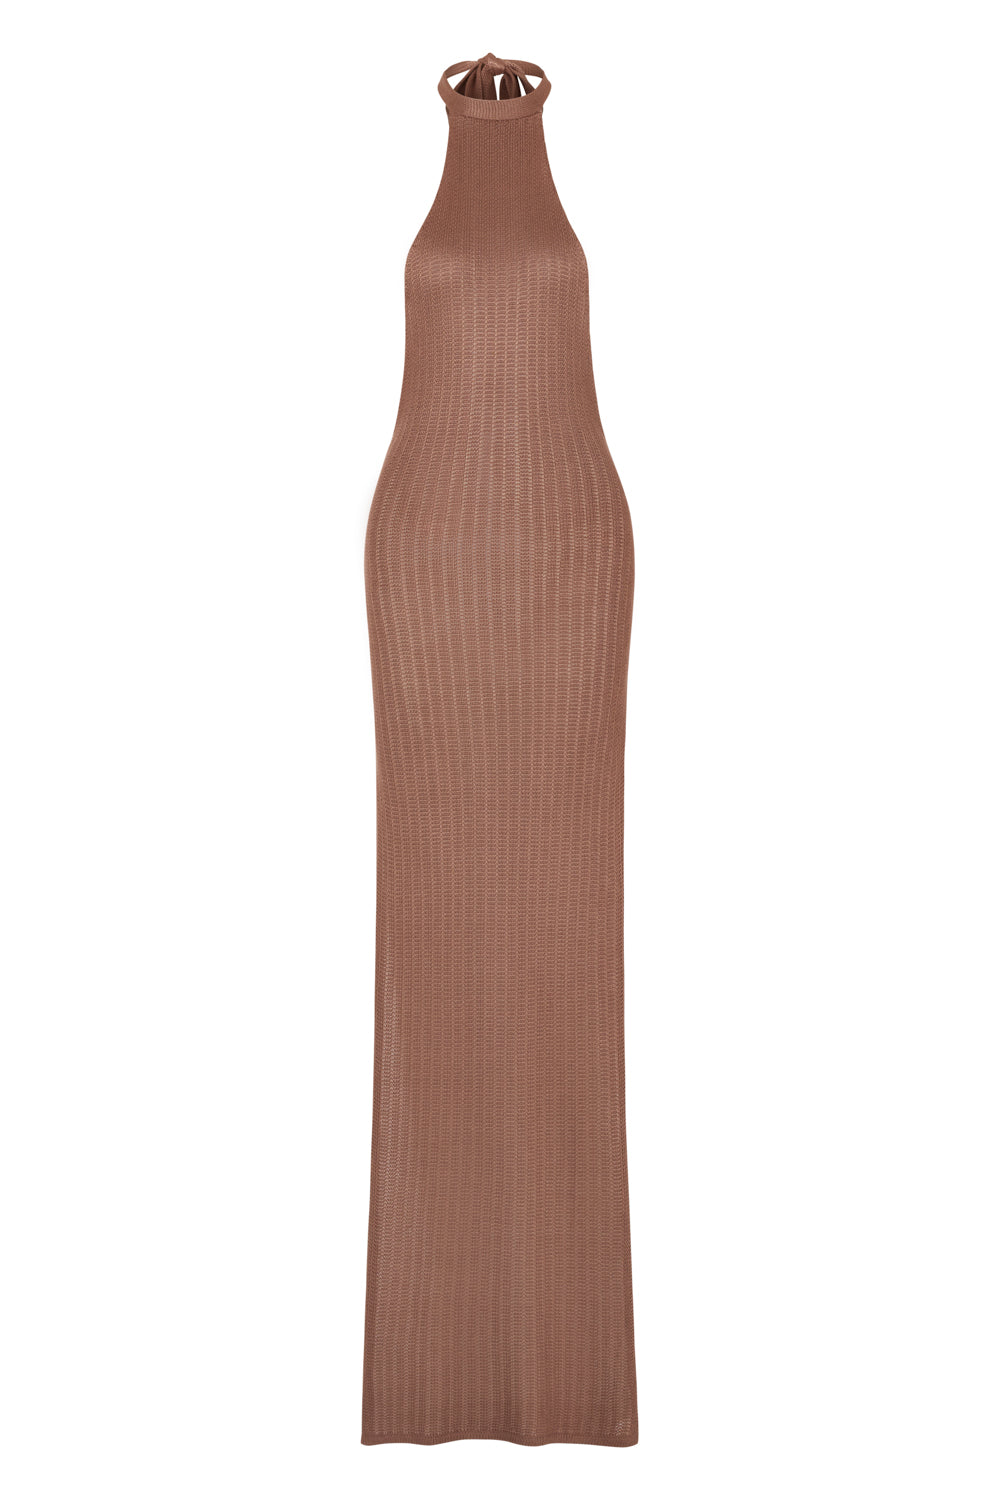 flook the label zaida maxi dress coco knit product image front 